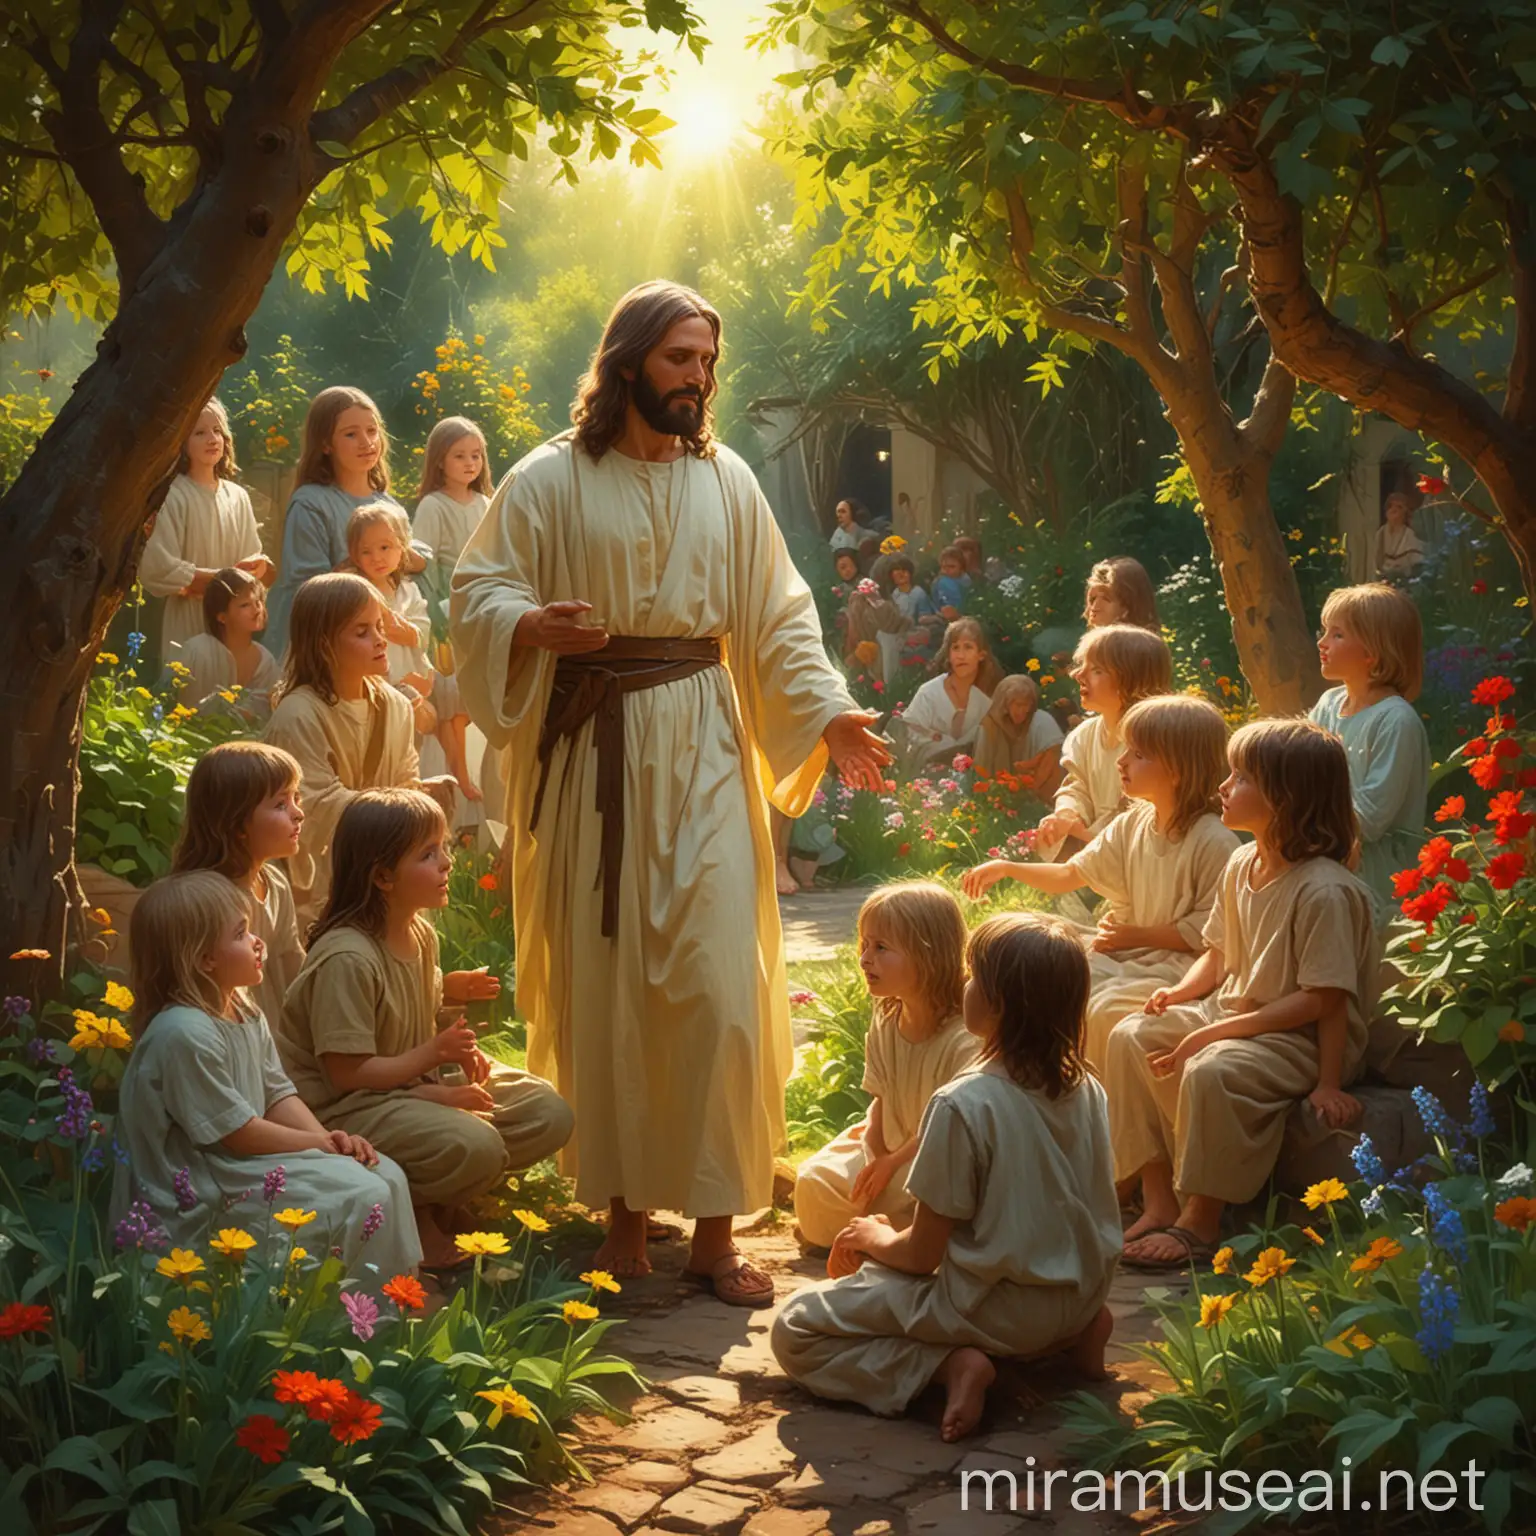 Vibrant Realistic Illustration Jesus Christ Engages with Children and Nature in a Sunlit Garden